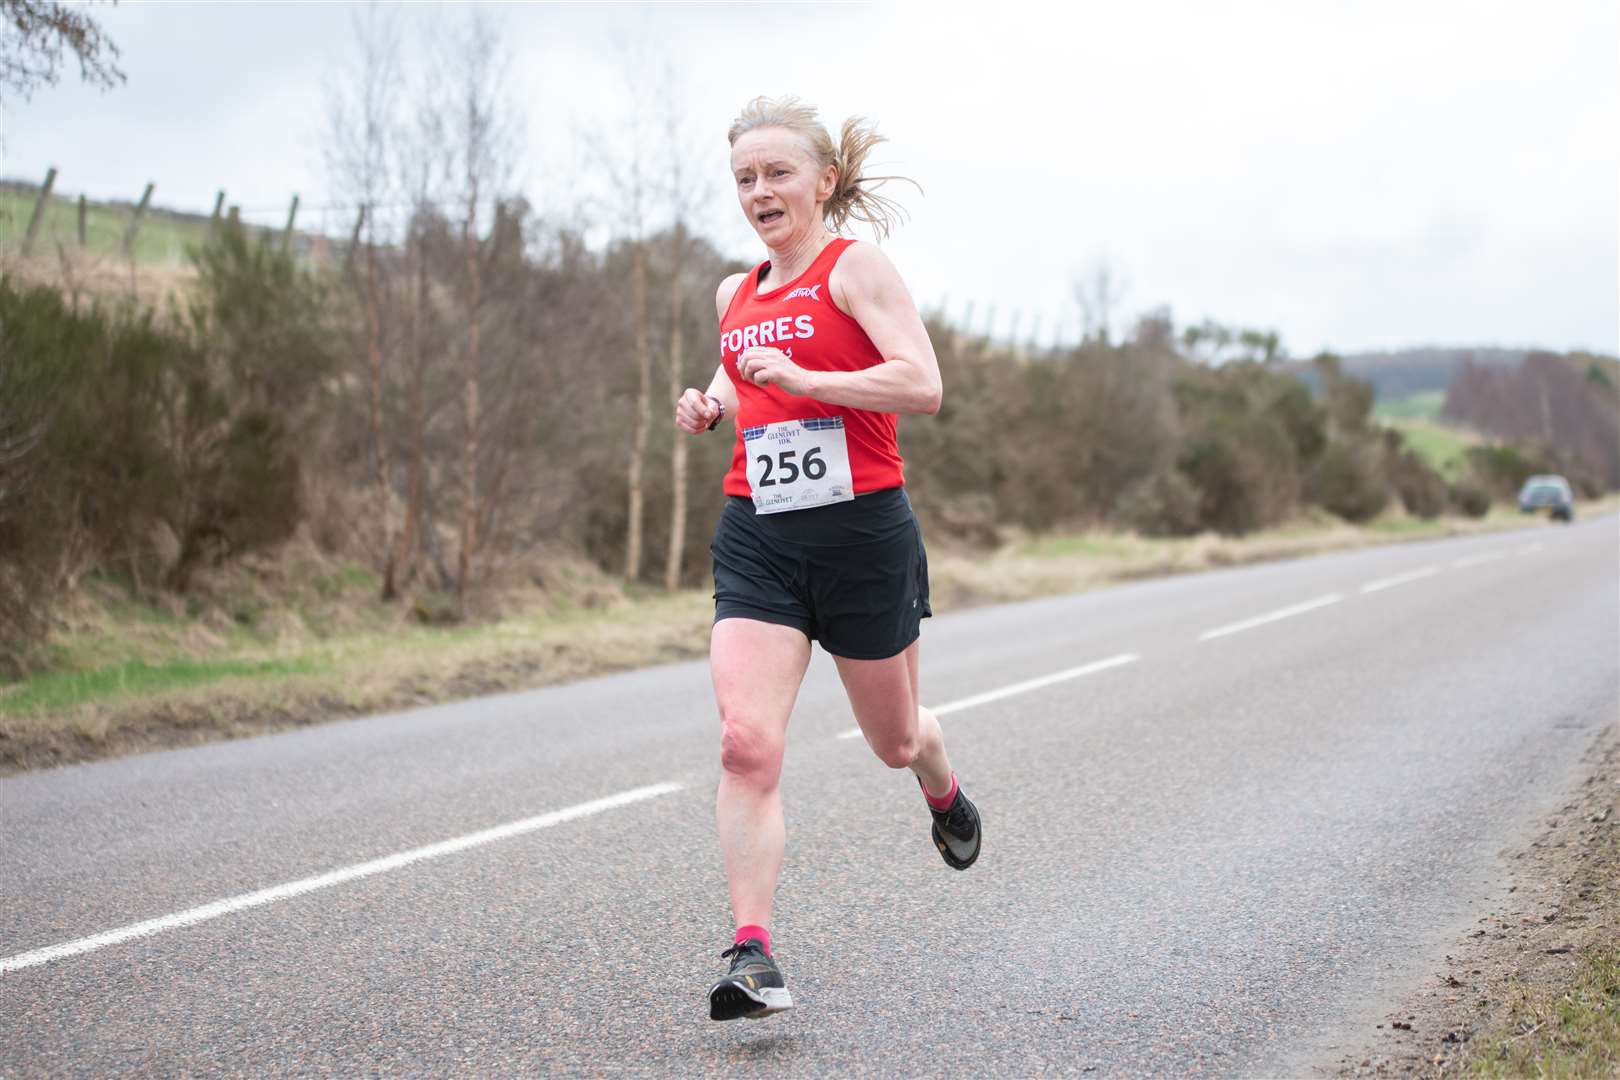 Forres Harriers' Susan Mcritchie finished 1st female and 23rd overall with a time of 43:55...2023 Glenlivet 10k Race, which raises money for Chest Heart & Stroke Scotland. .. Picture: Daniel Forsyth..